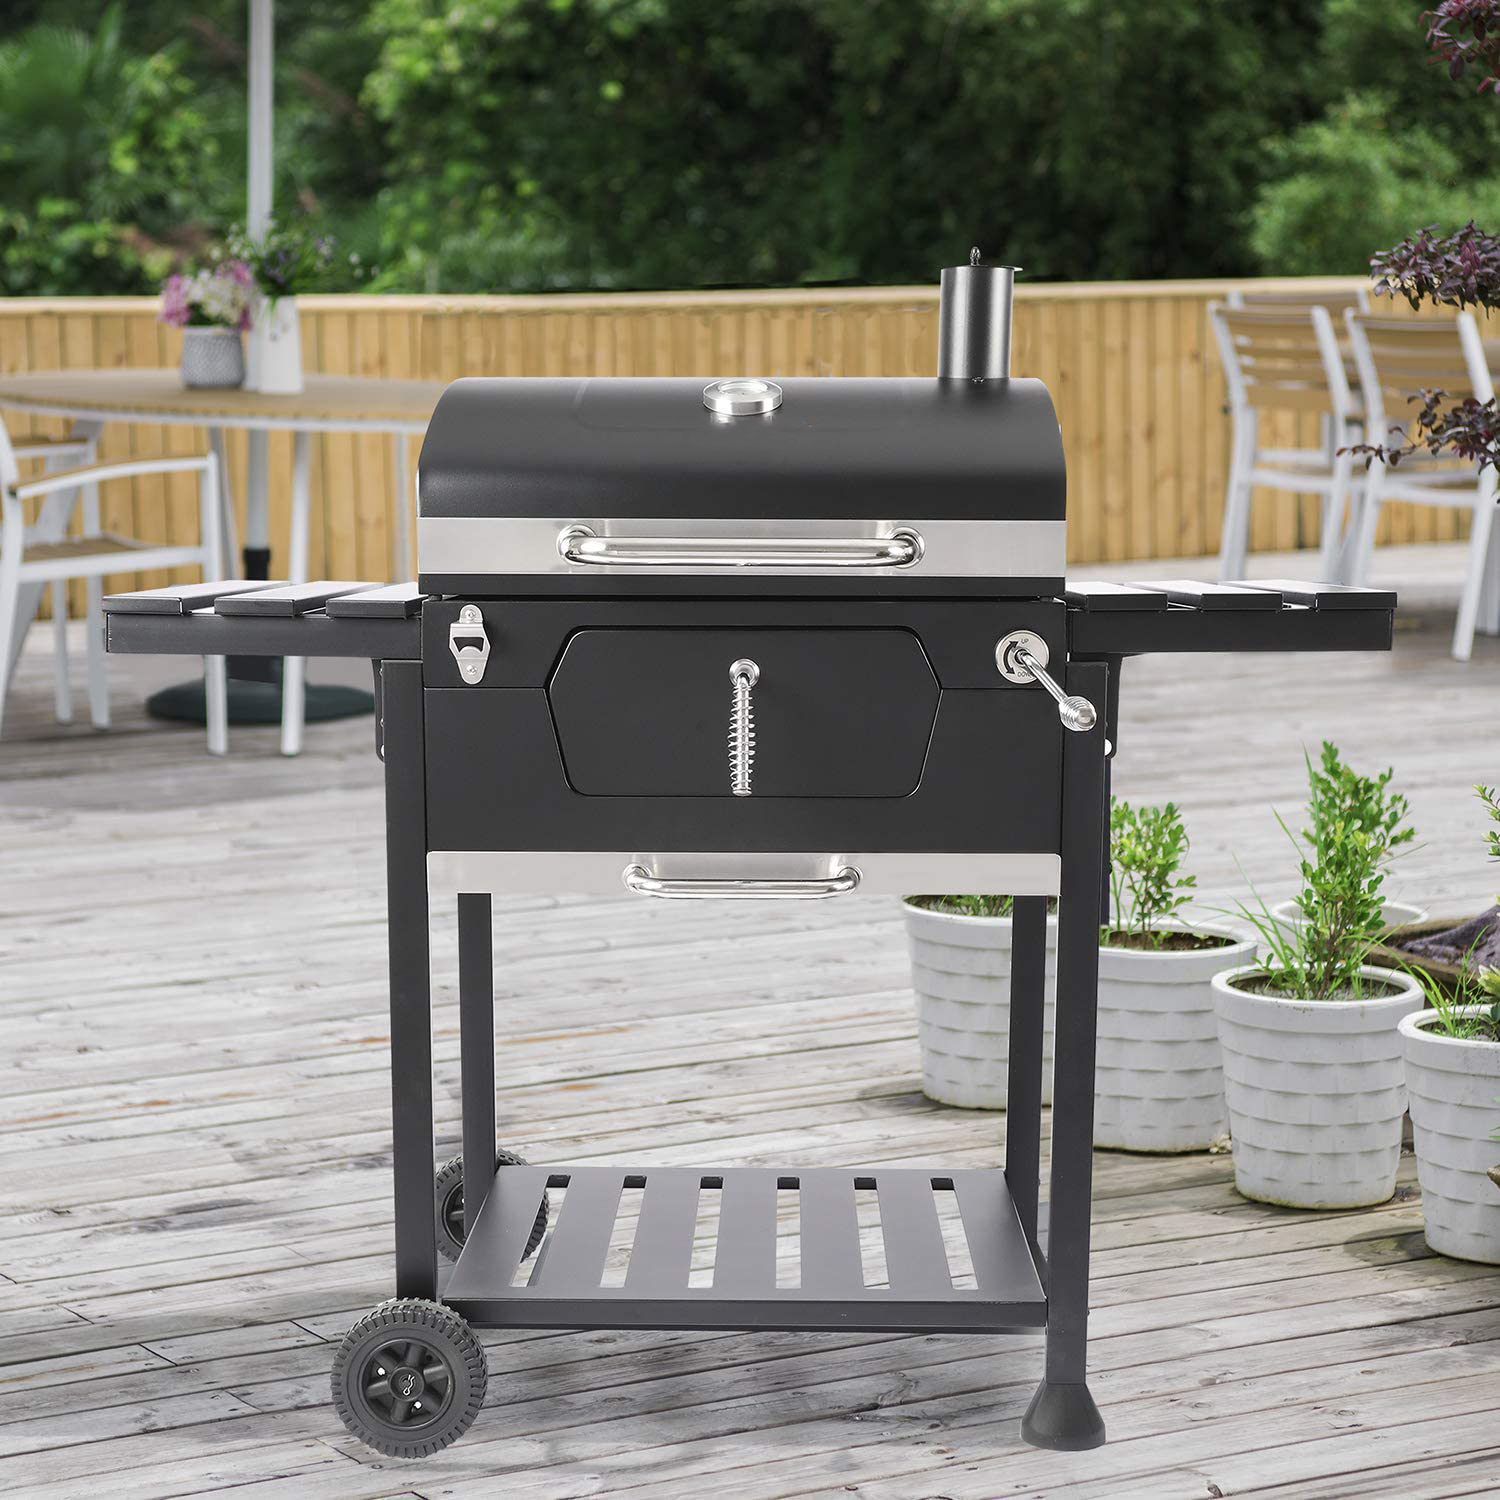 Outdoor Home Yard Enamel Cooking Stove Stainless Steel Rack Large BBQ Grill